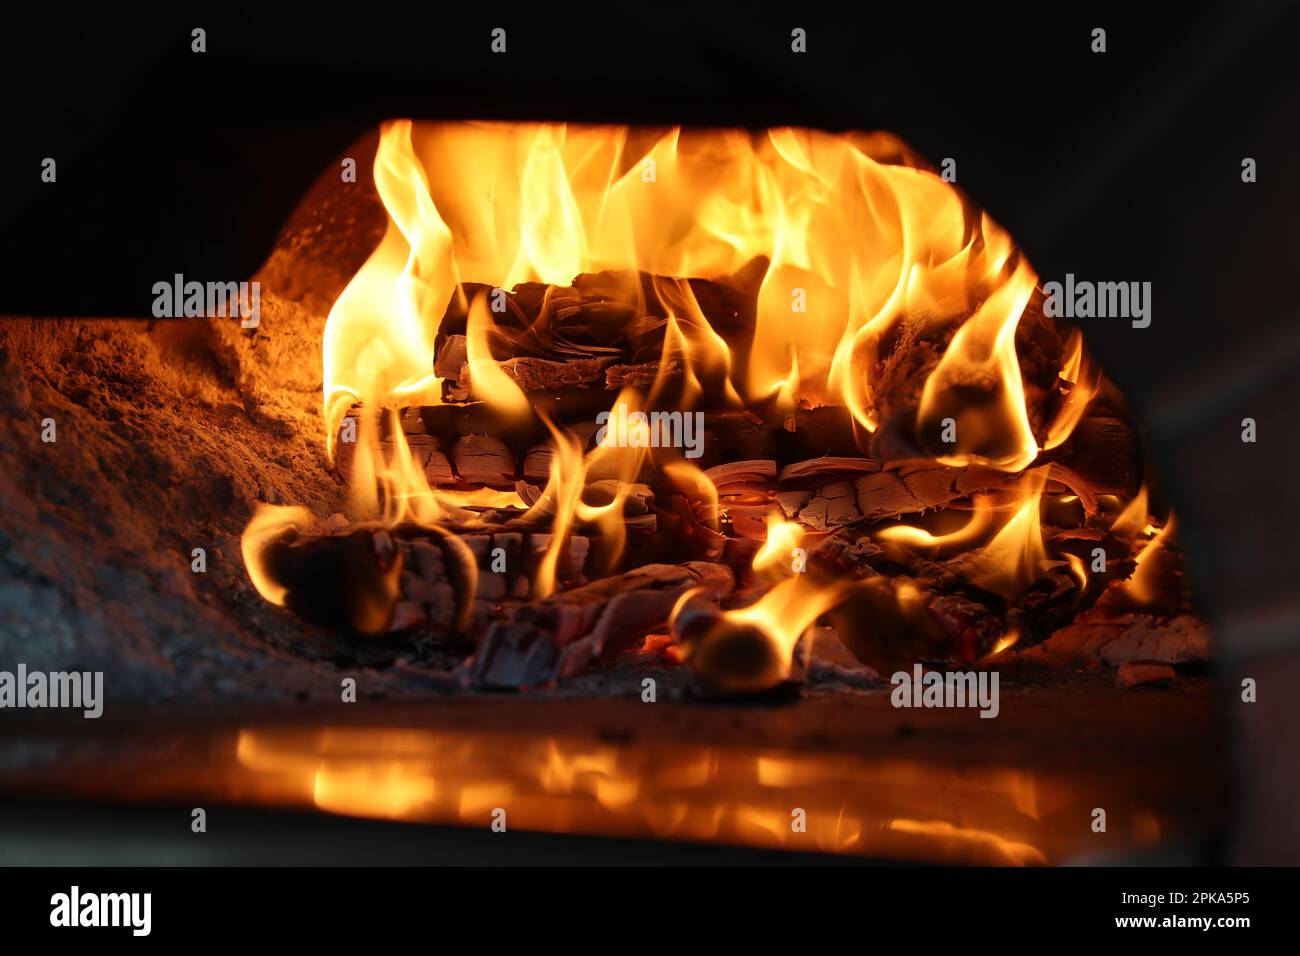 26.02.2022, Qatar, , Doha - Burning logs in an open fireplace. 00S220226D021CAROEX.JPG [MODEL RELEASE: NOT Applicable, PROPERTY RELEASE: NO (c) caro i Stock Photo